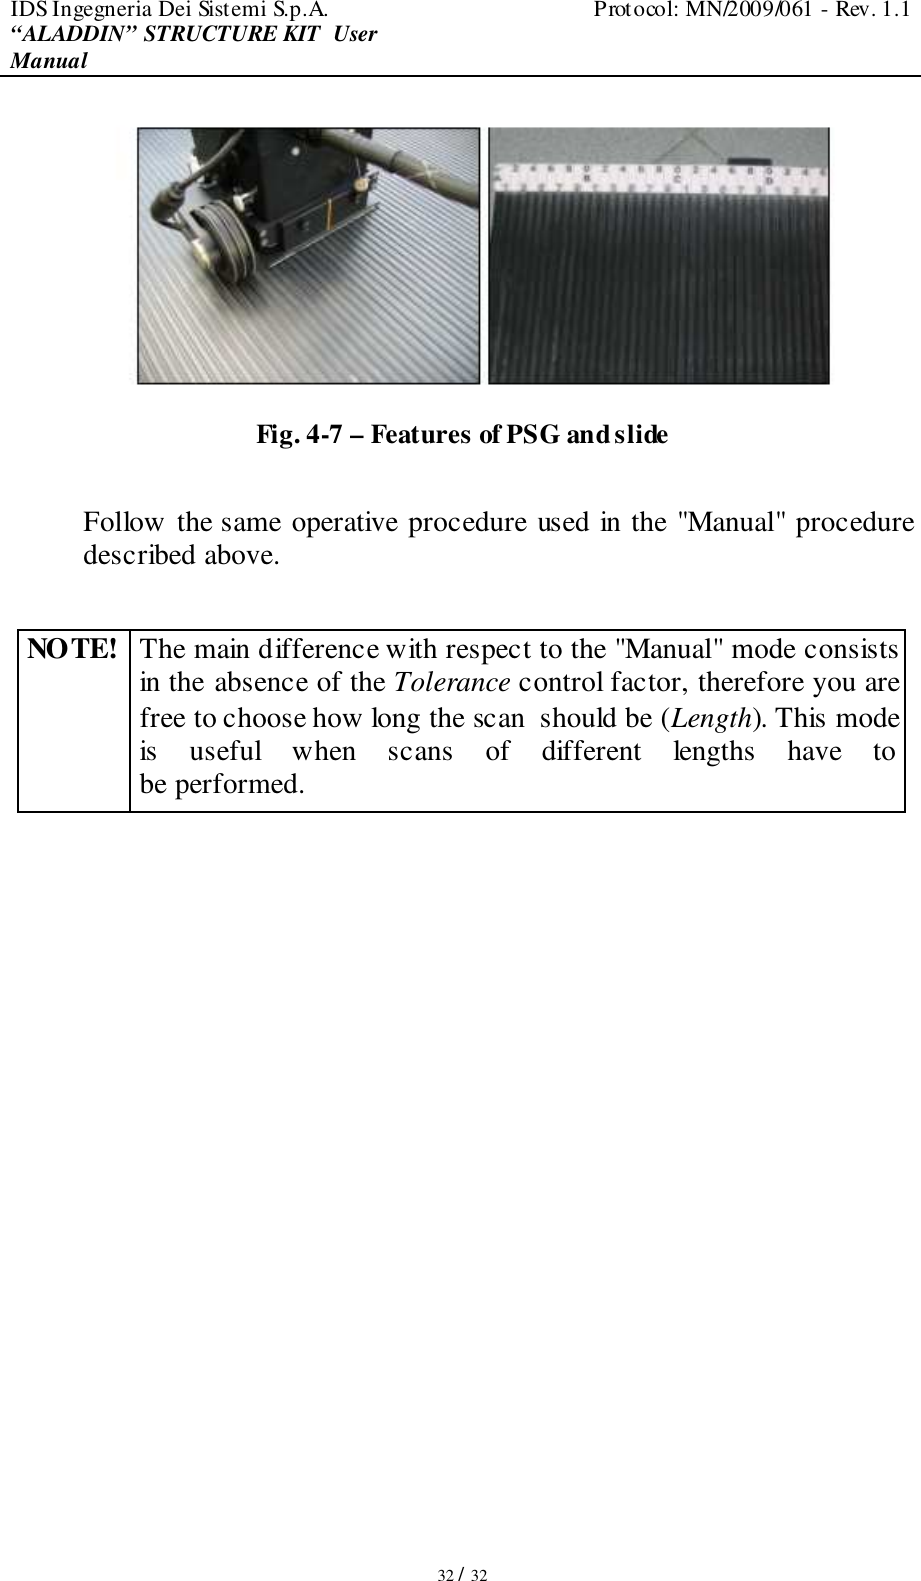 IDS Ingegneria Dei Sistemi S.p.A.  Protocol: MN/2009/061 - Rev. 1.1 “ALADDIN” STRUCTURE KIT  User Manual   32 / 32  Fig. 4-7 – Features of PSG and slide  Follow the same operative procedure used in the &quot;Manual&quot; procedure described above.  NOTE! The main difference with respect to the &quot;Manual&quot; mode consists in the absence of the Tolerance control factor, therefore you are free to choose how long the scan  should be (Length). This mode is  useful  when  scans  of  different  lengths  have  to be performed.  